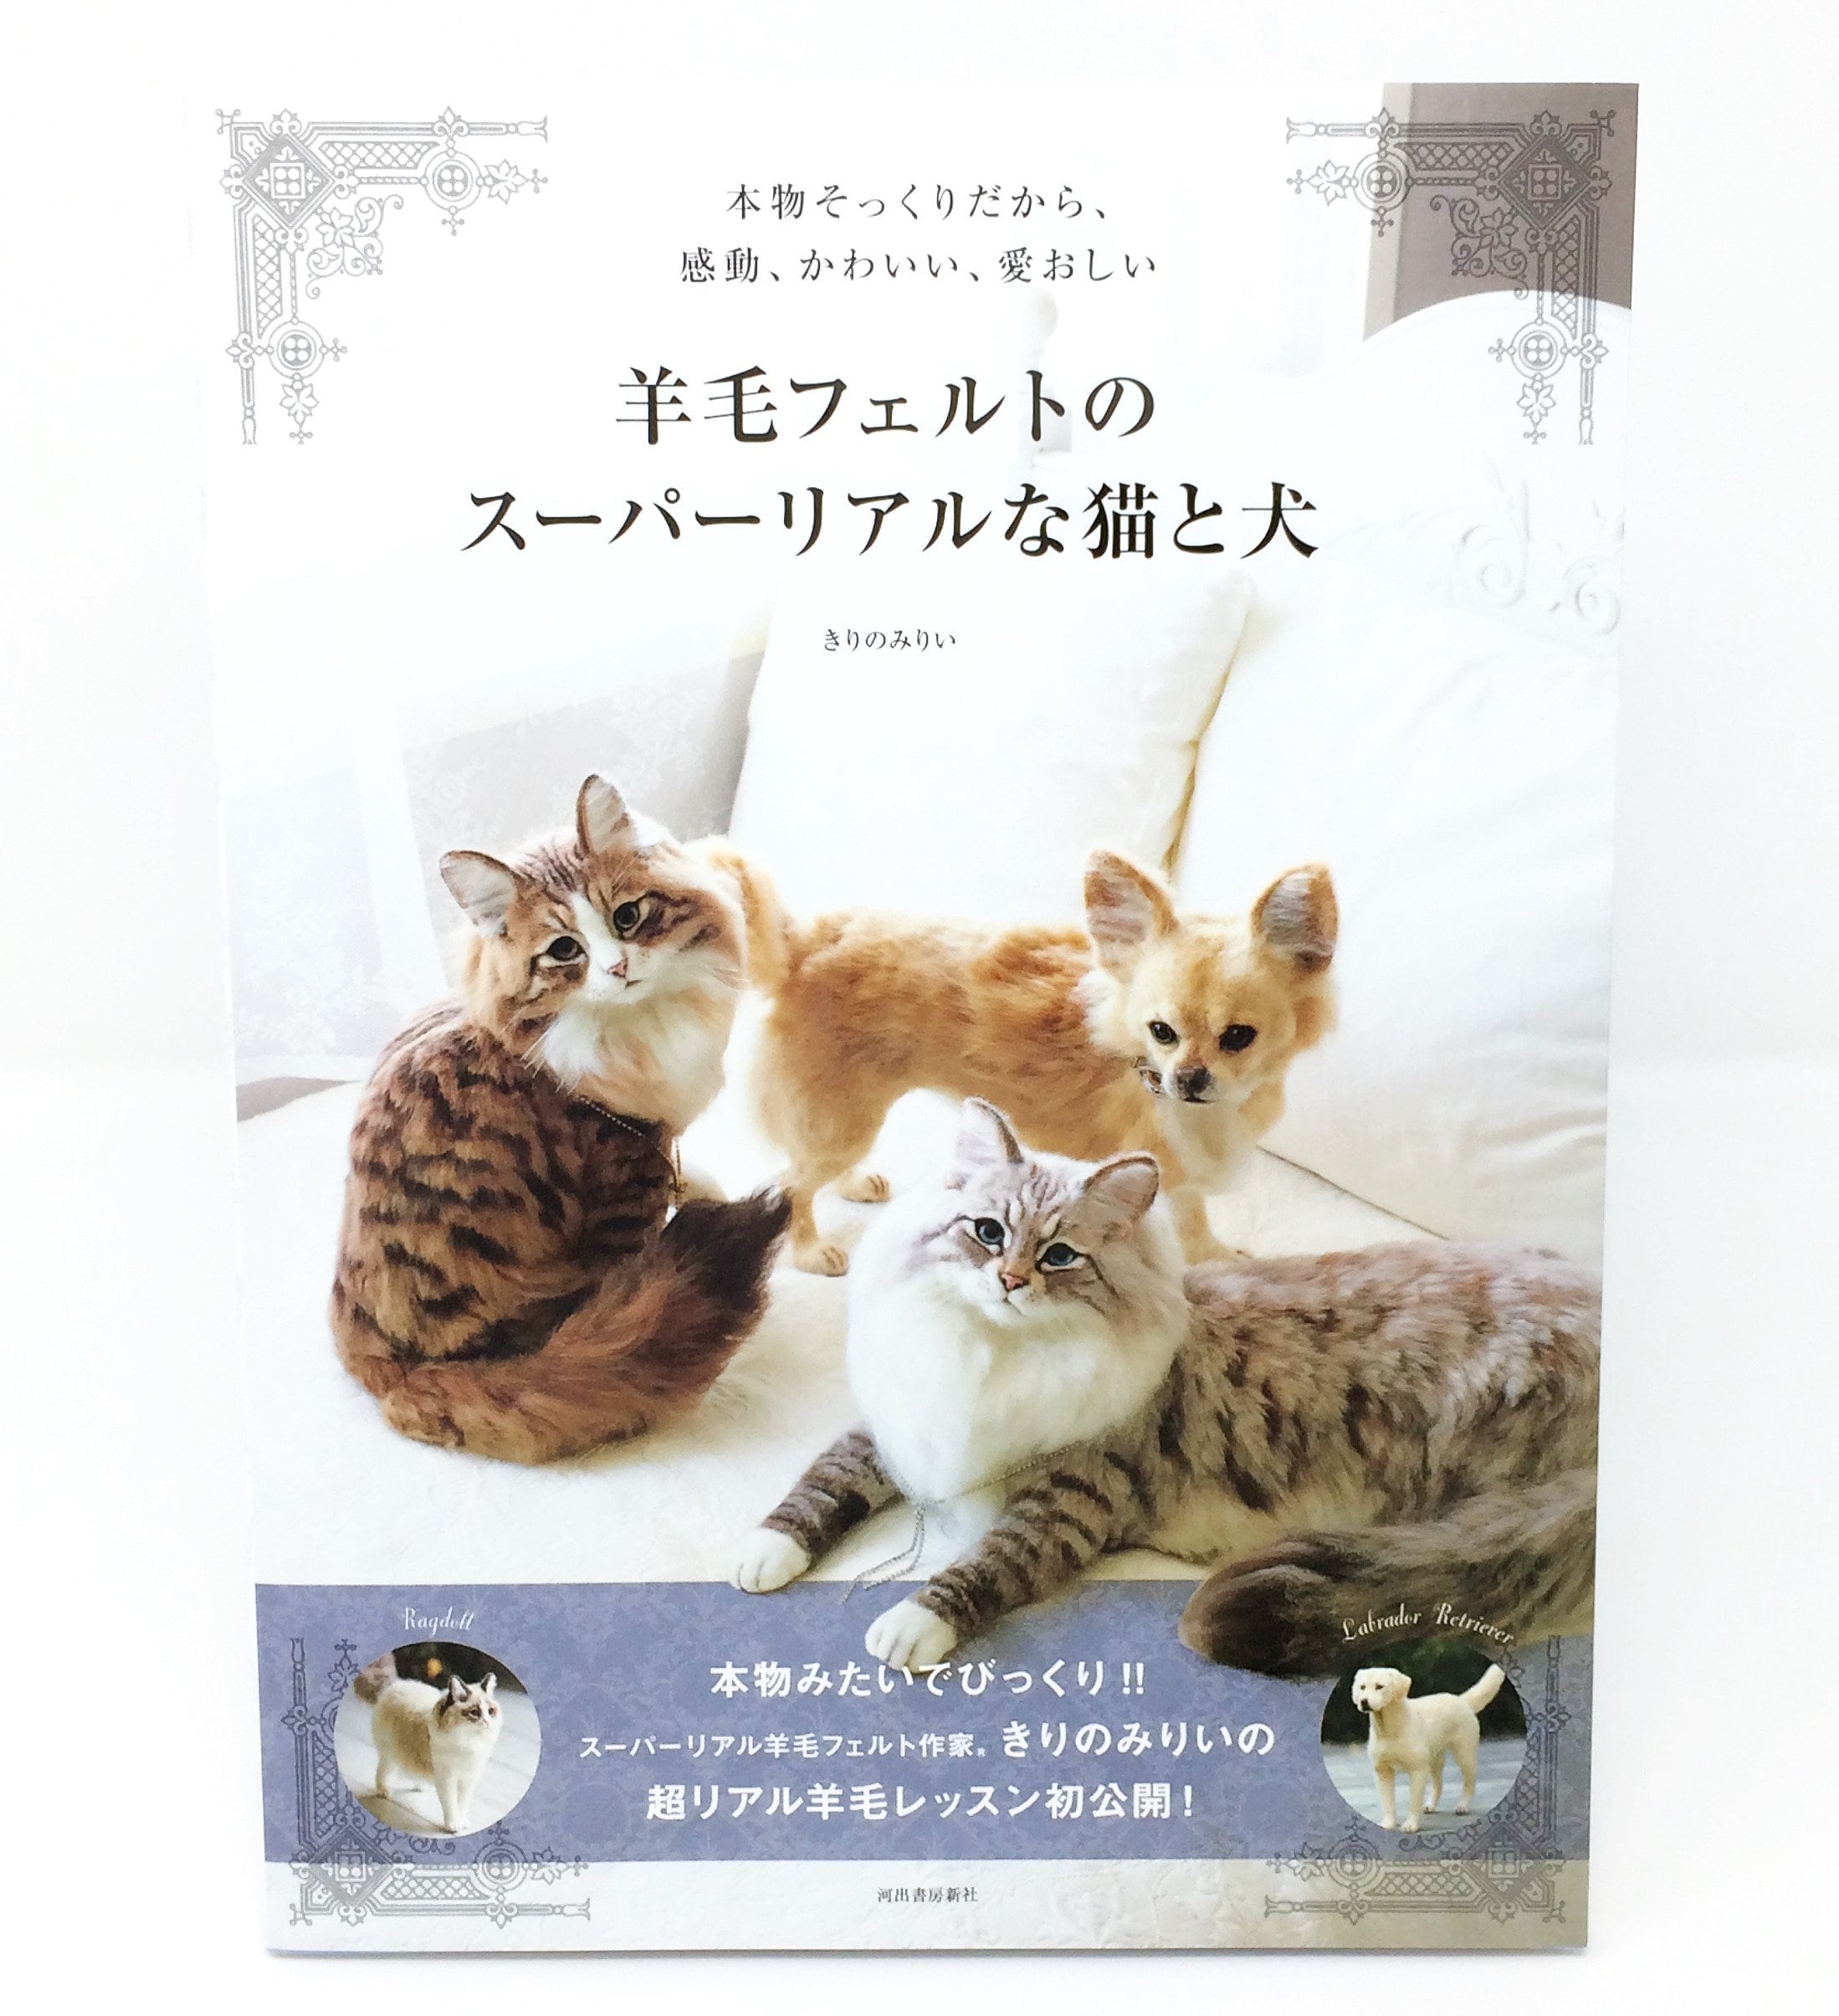 Japanese Realistic Dogs and Cats Needle Felting Book by Mirii Kirino 